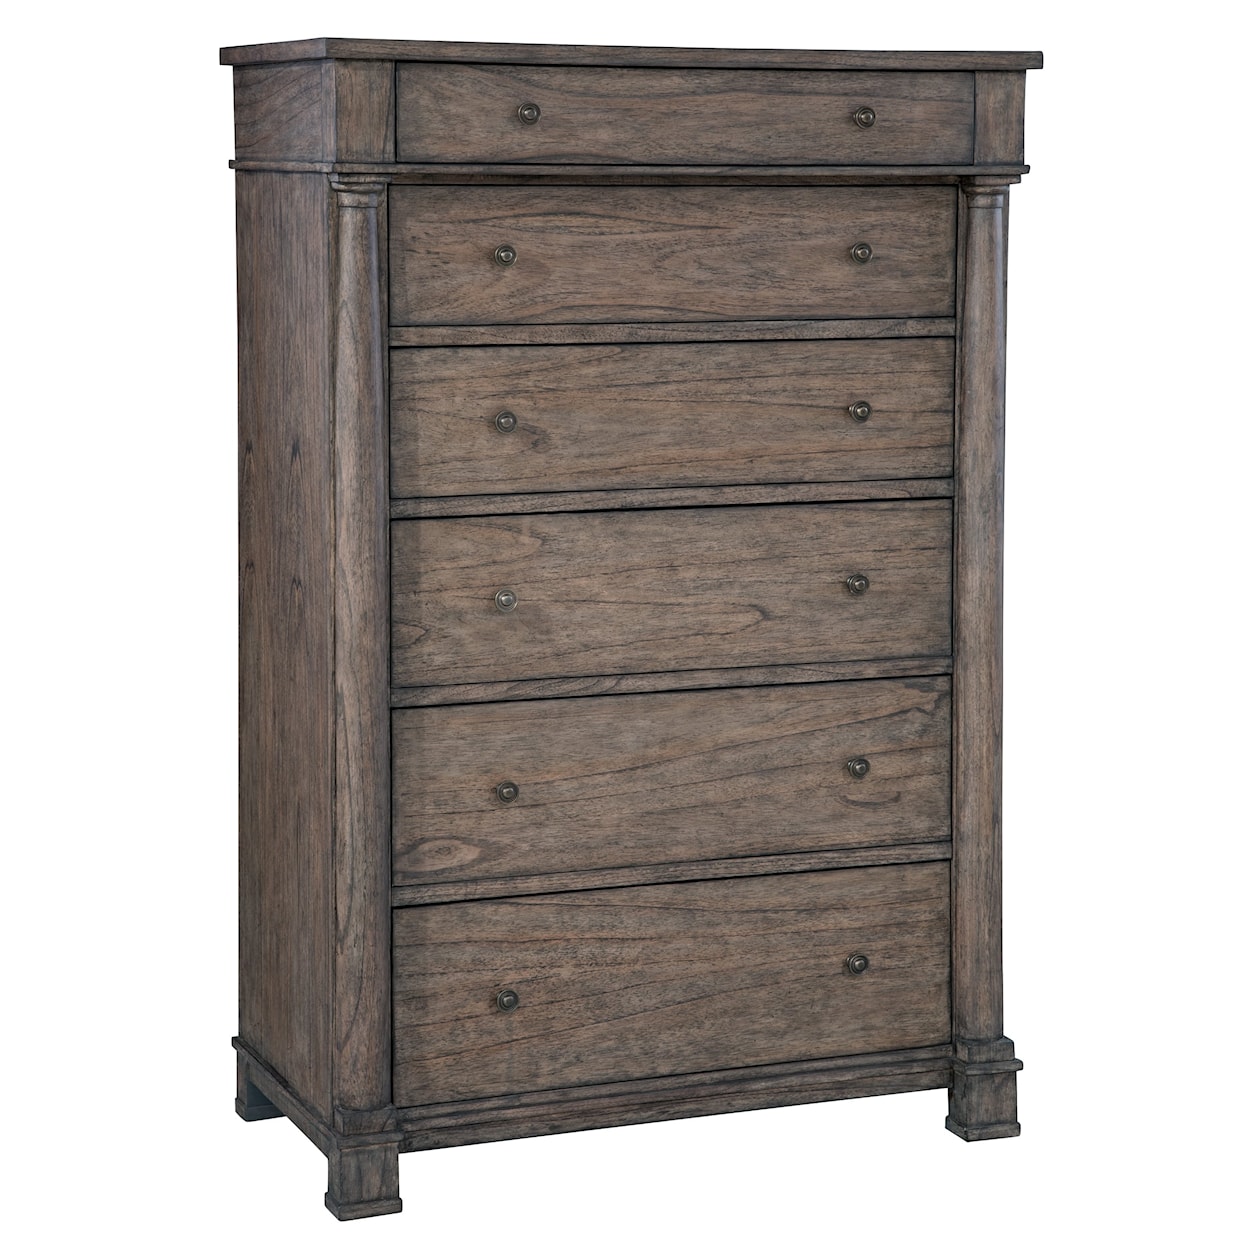 Hekman Lincoln Park Bedroom Chest